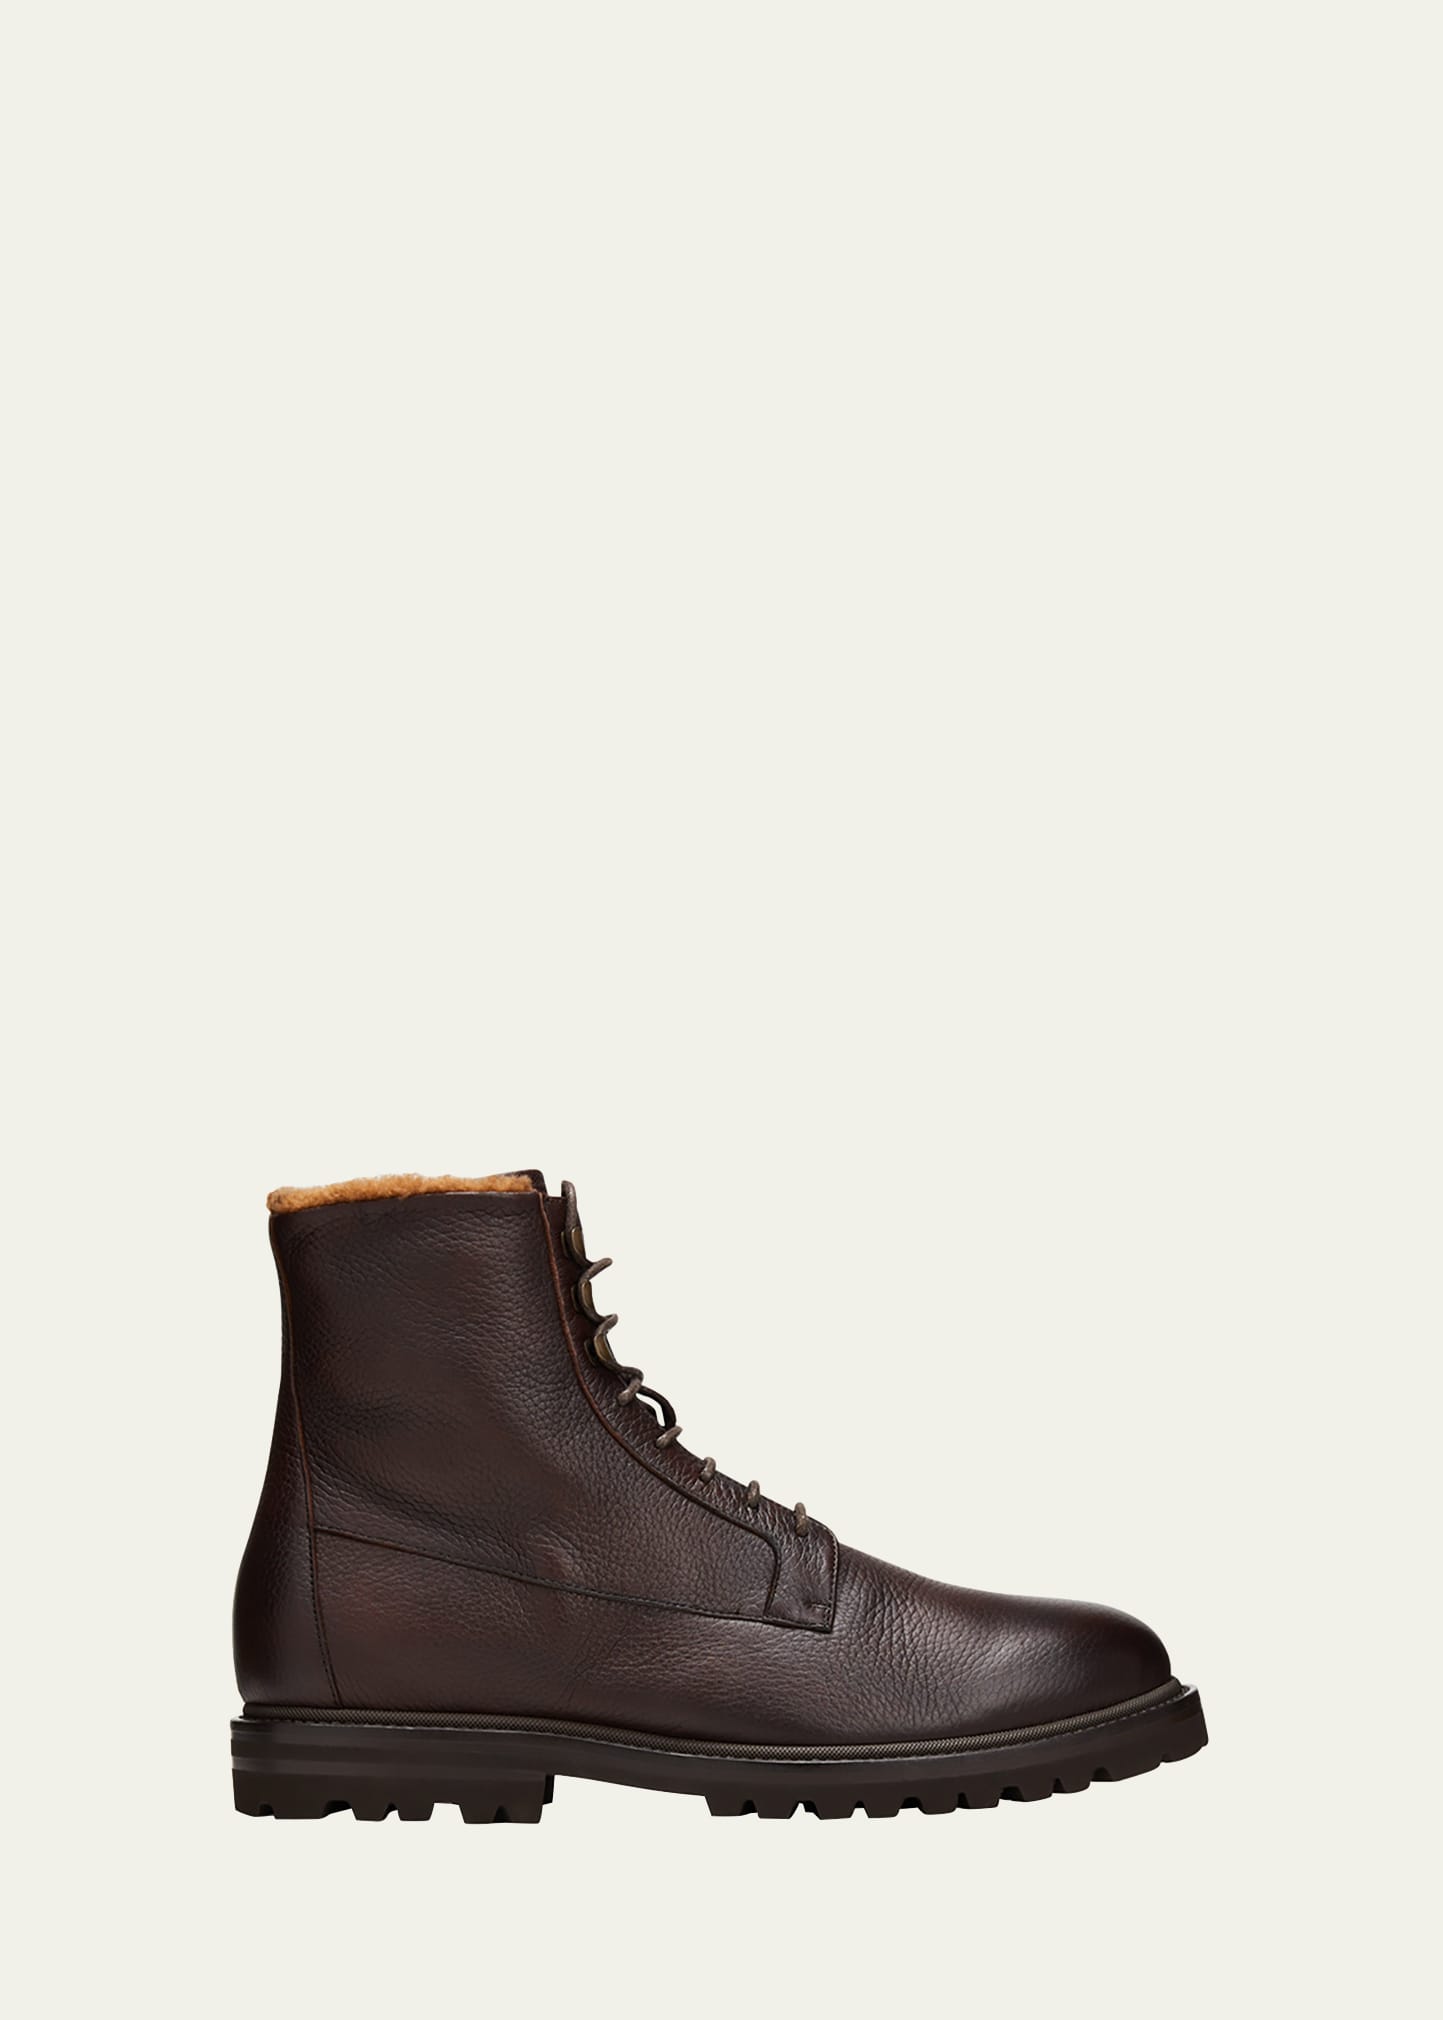 Men's Shearling-Lined Leather Lace-Up Boots